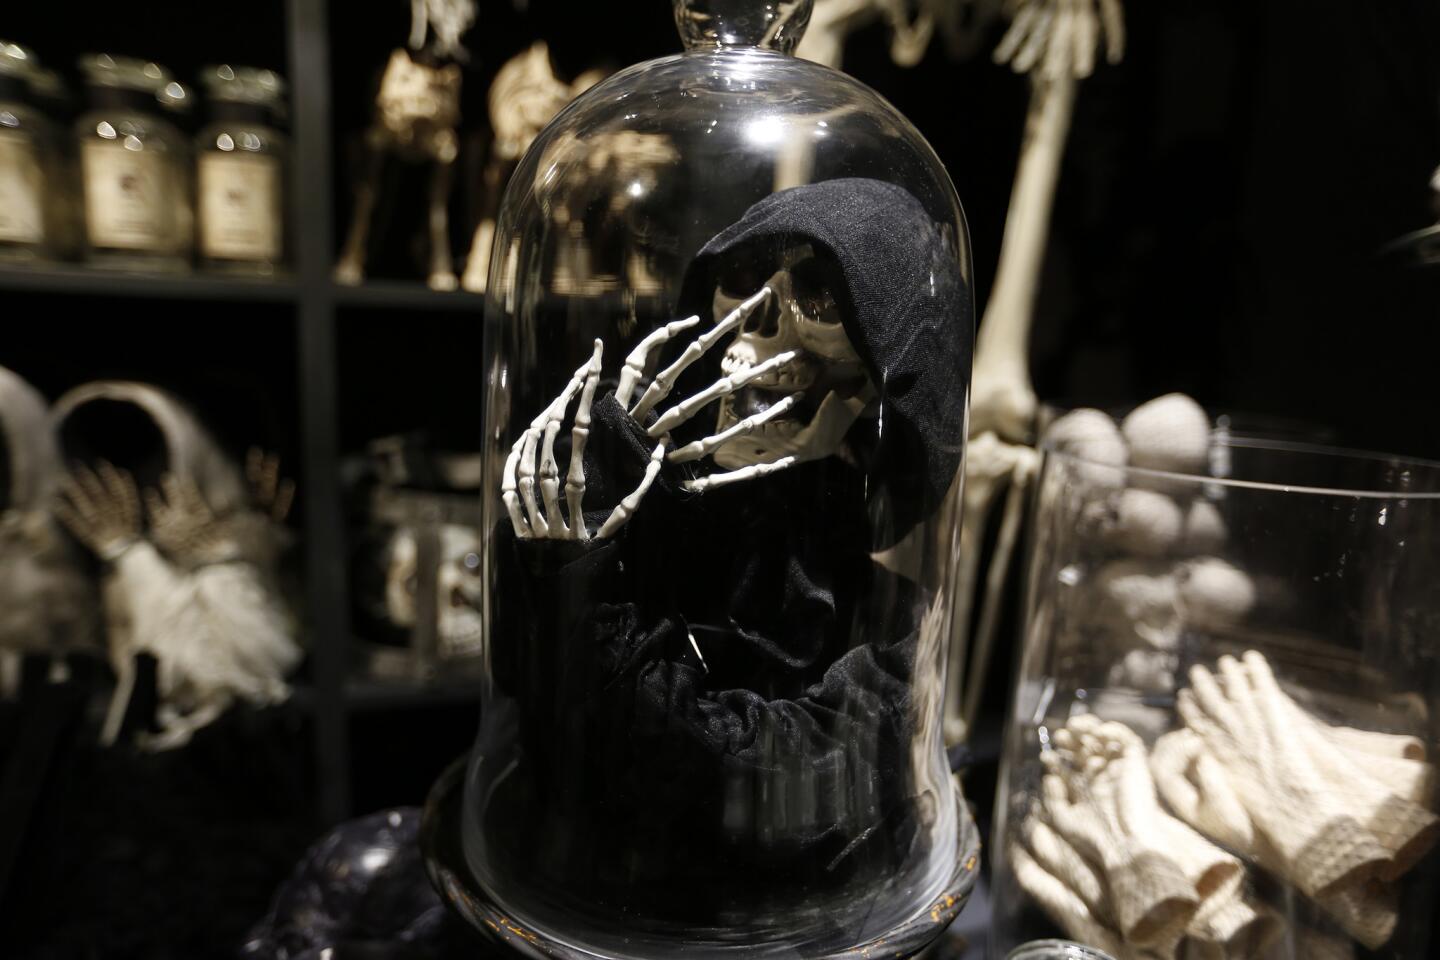 Skulls and all things skeletal are grouped in the Sleeping Beauty section of Roger's Gardens' Halloween-themed Grimm Tales Halloween boutique in Corona Del Mar.